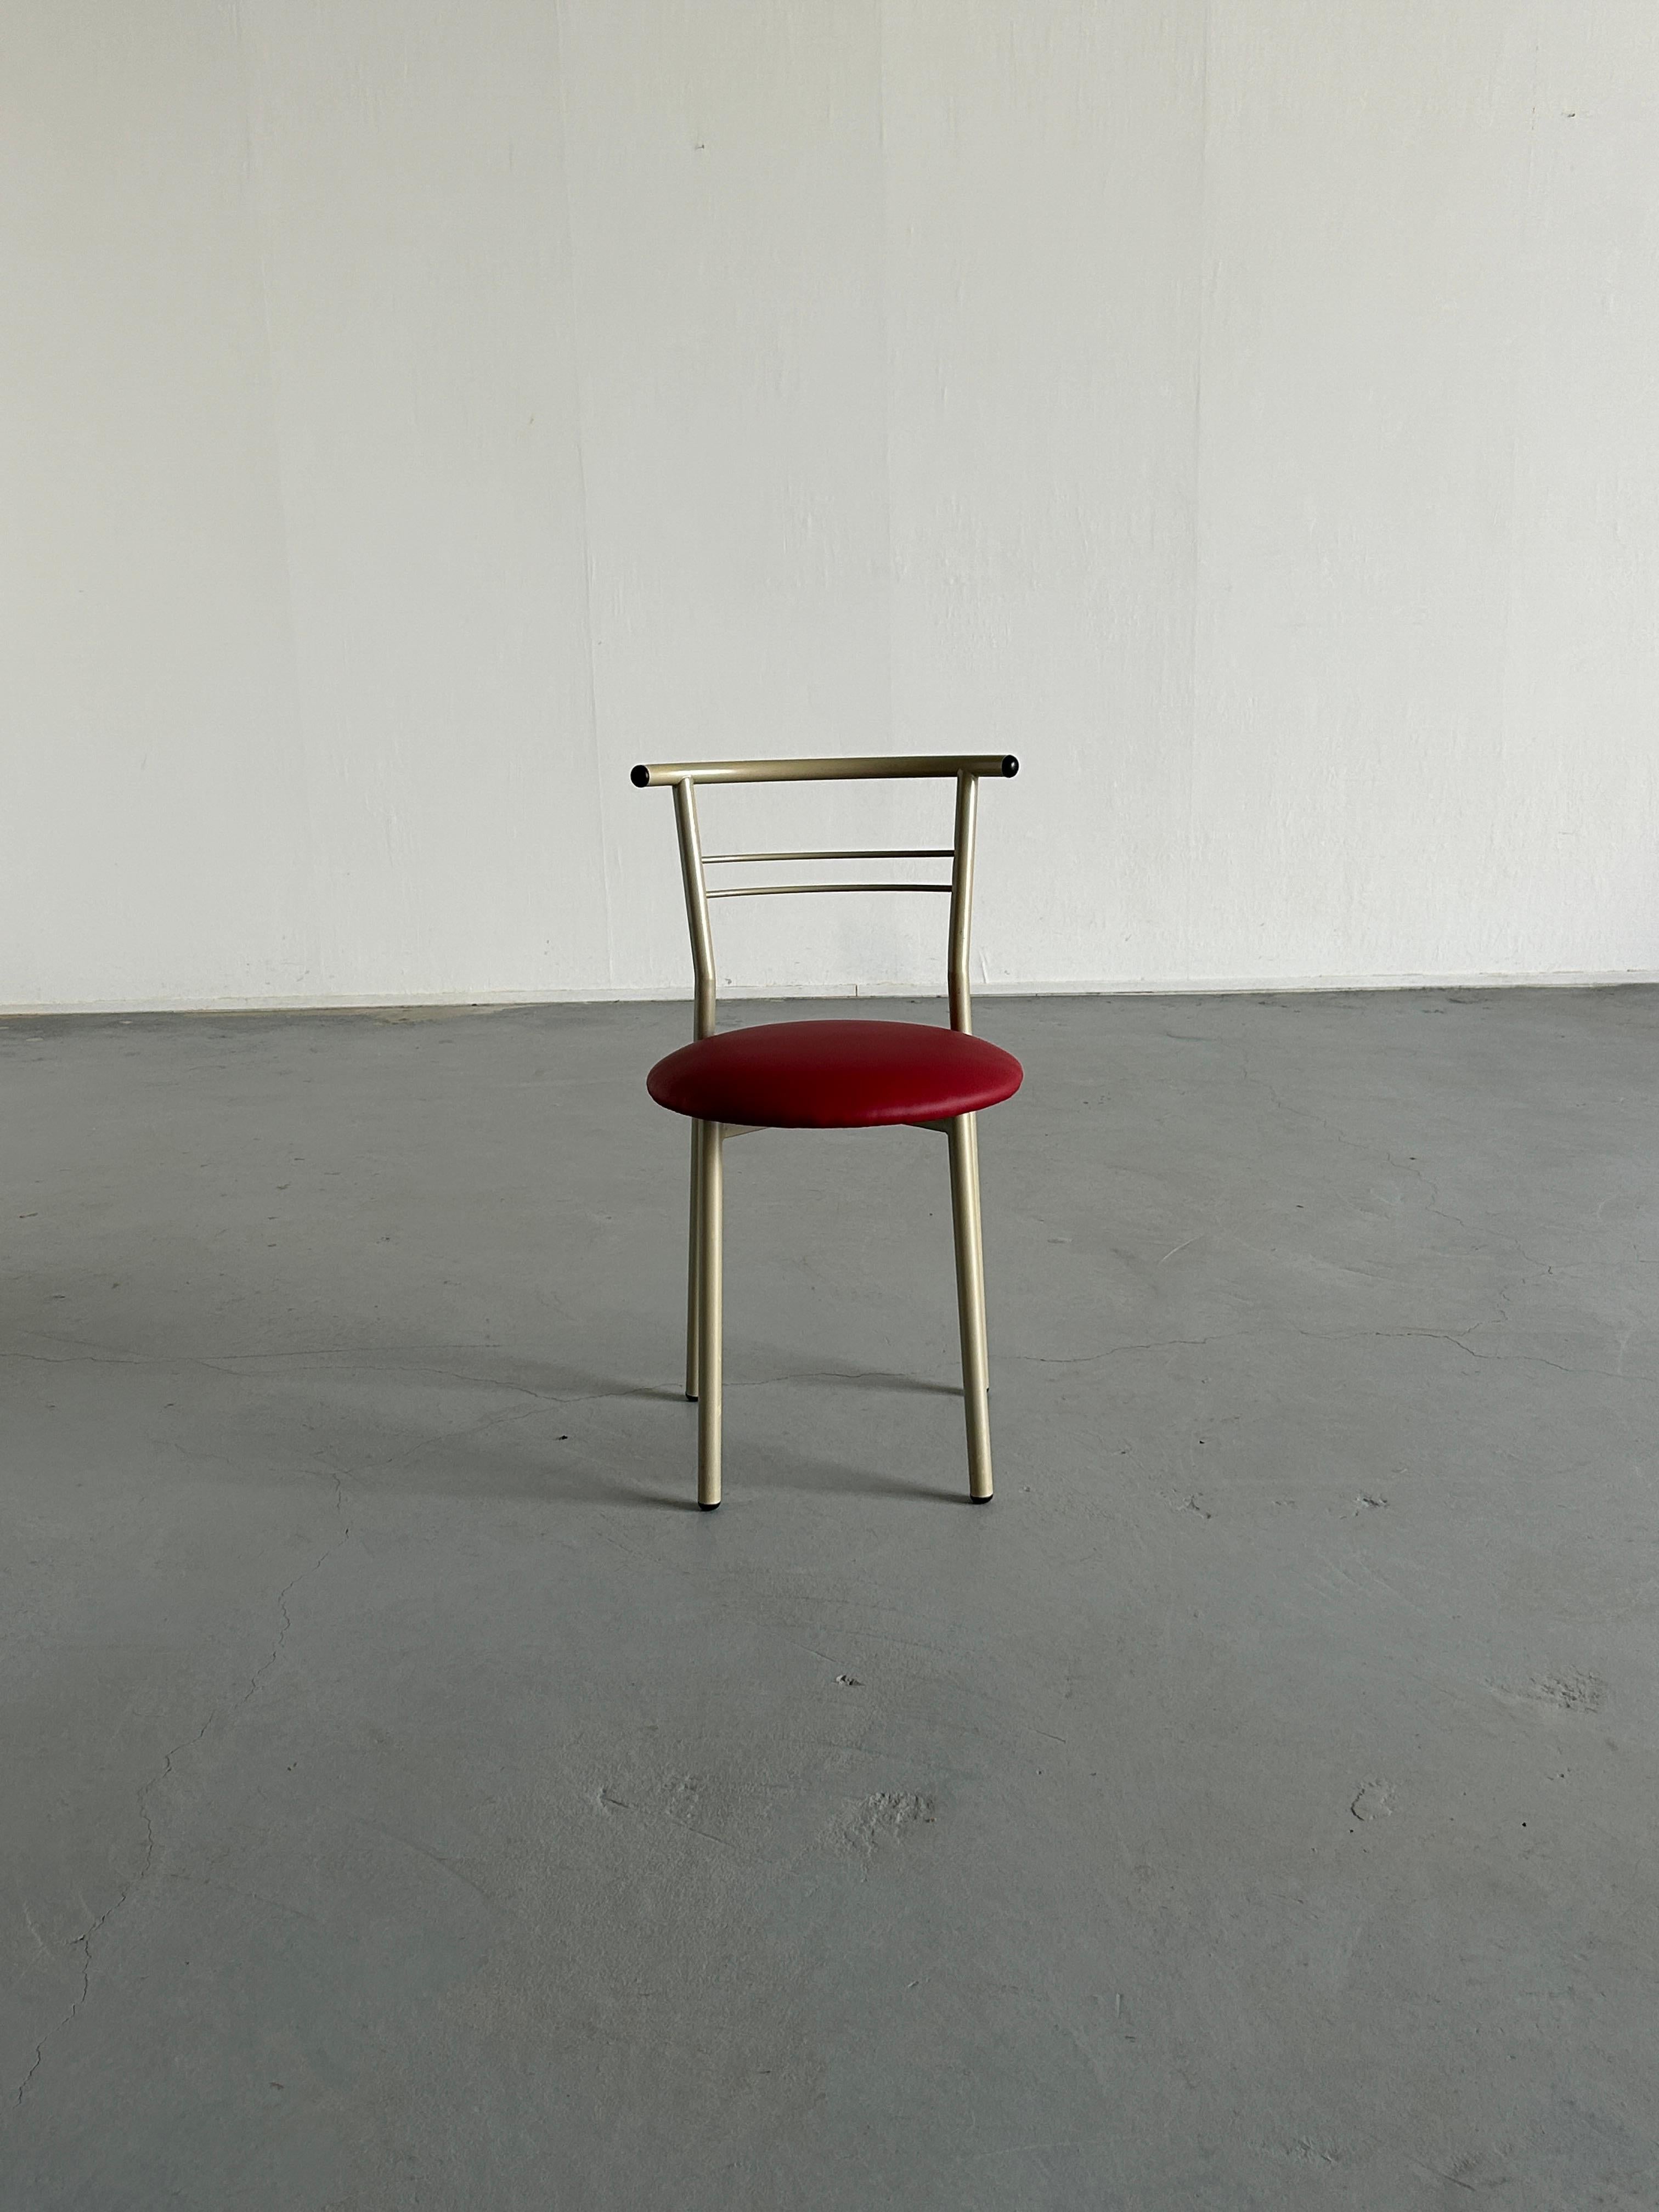 Post-Modern Postmodern Memphis Style Chair with Red Faux Leather Upholstery, 1980s Italy For Sale